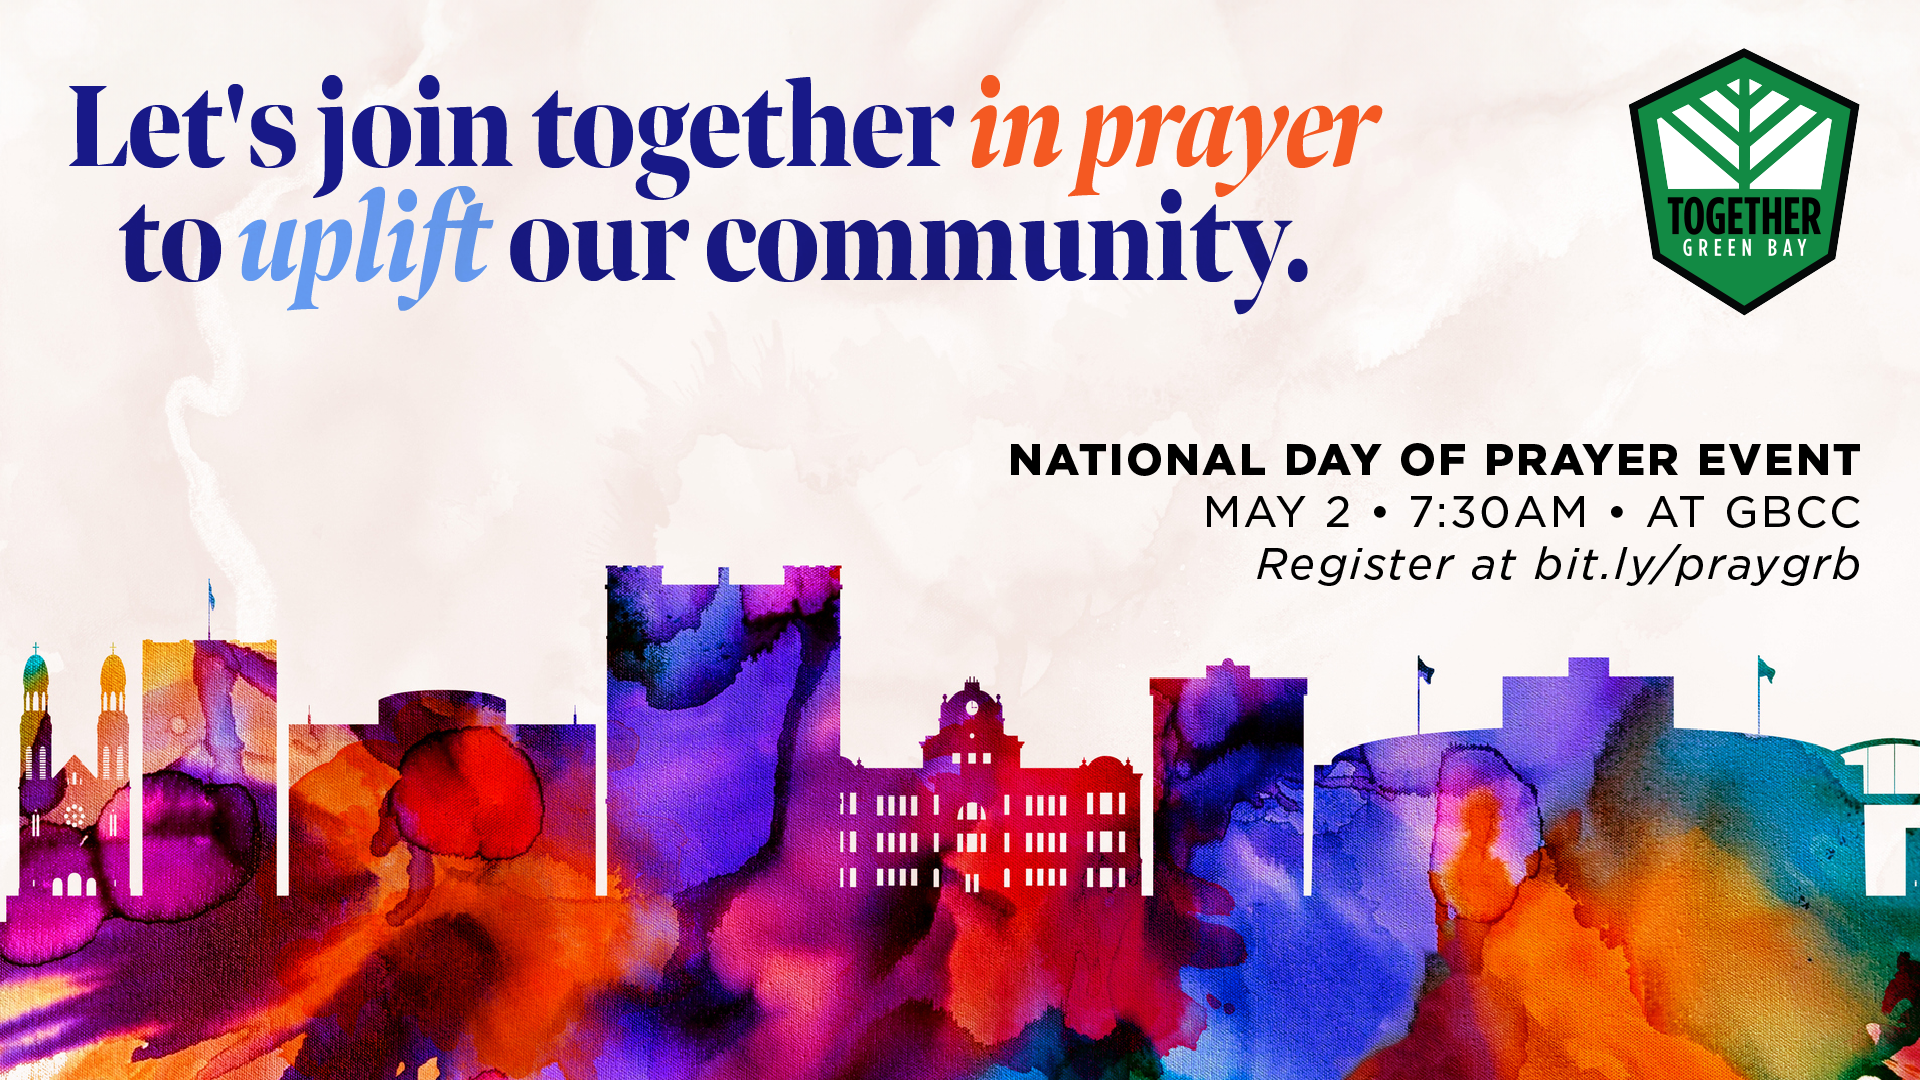 Green Bay National Day of Prayer Event